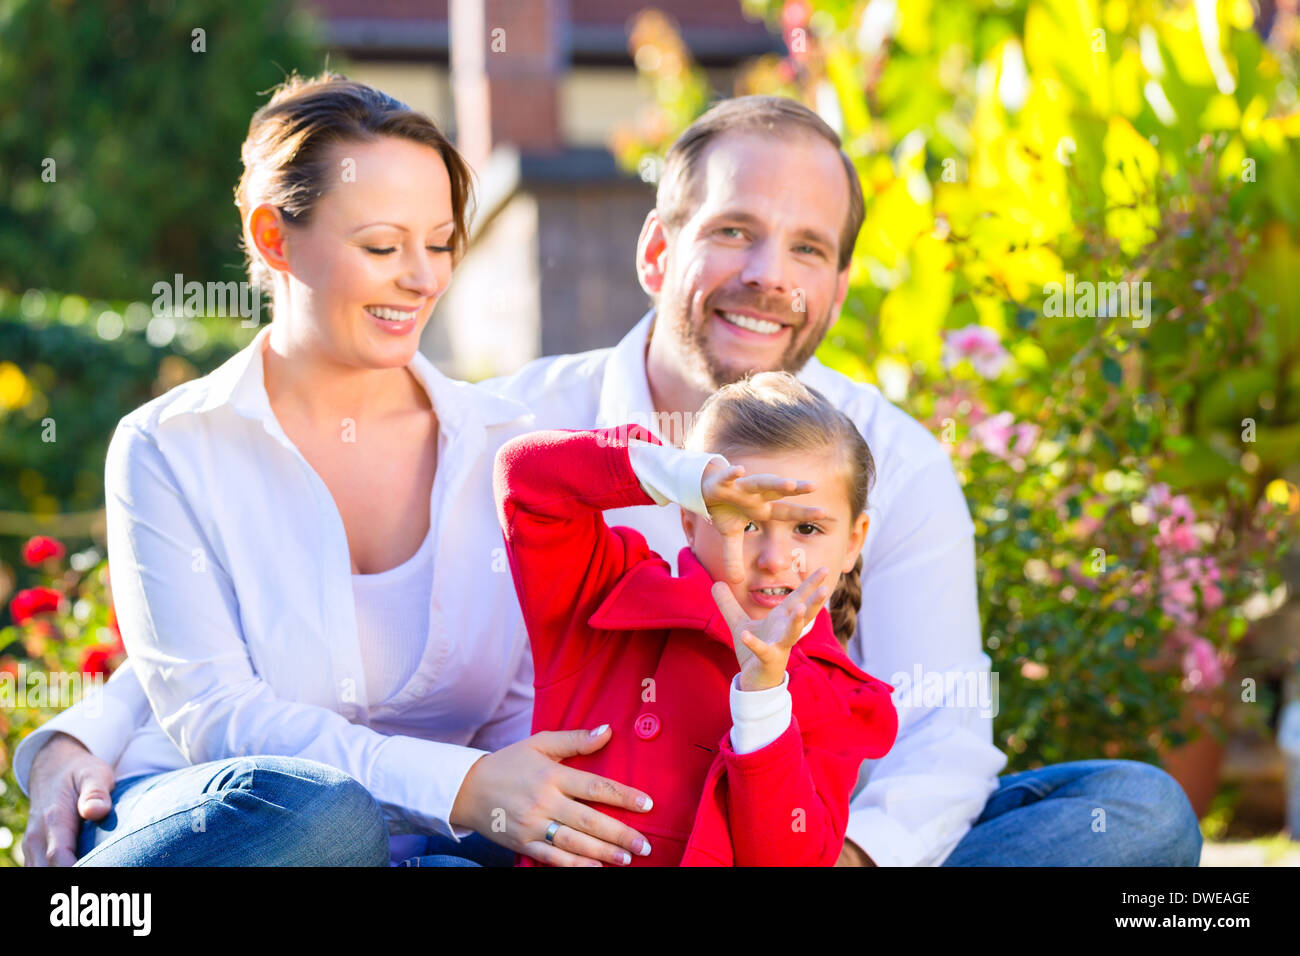 Family with mother, father and daughter together in the garden meadow Stock Photo